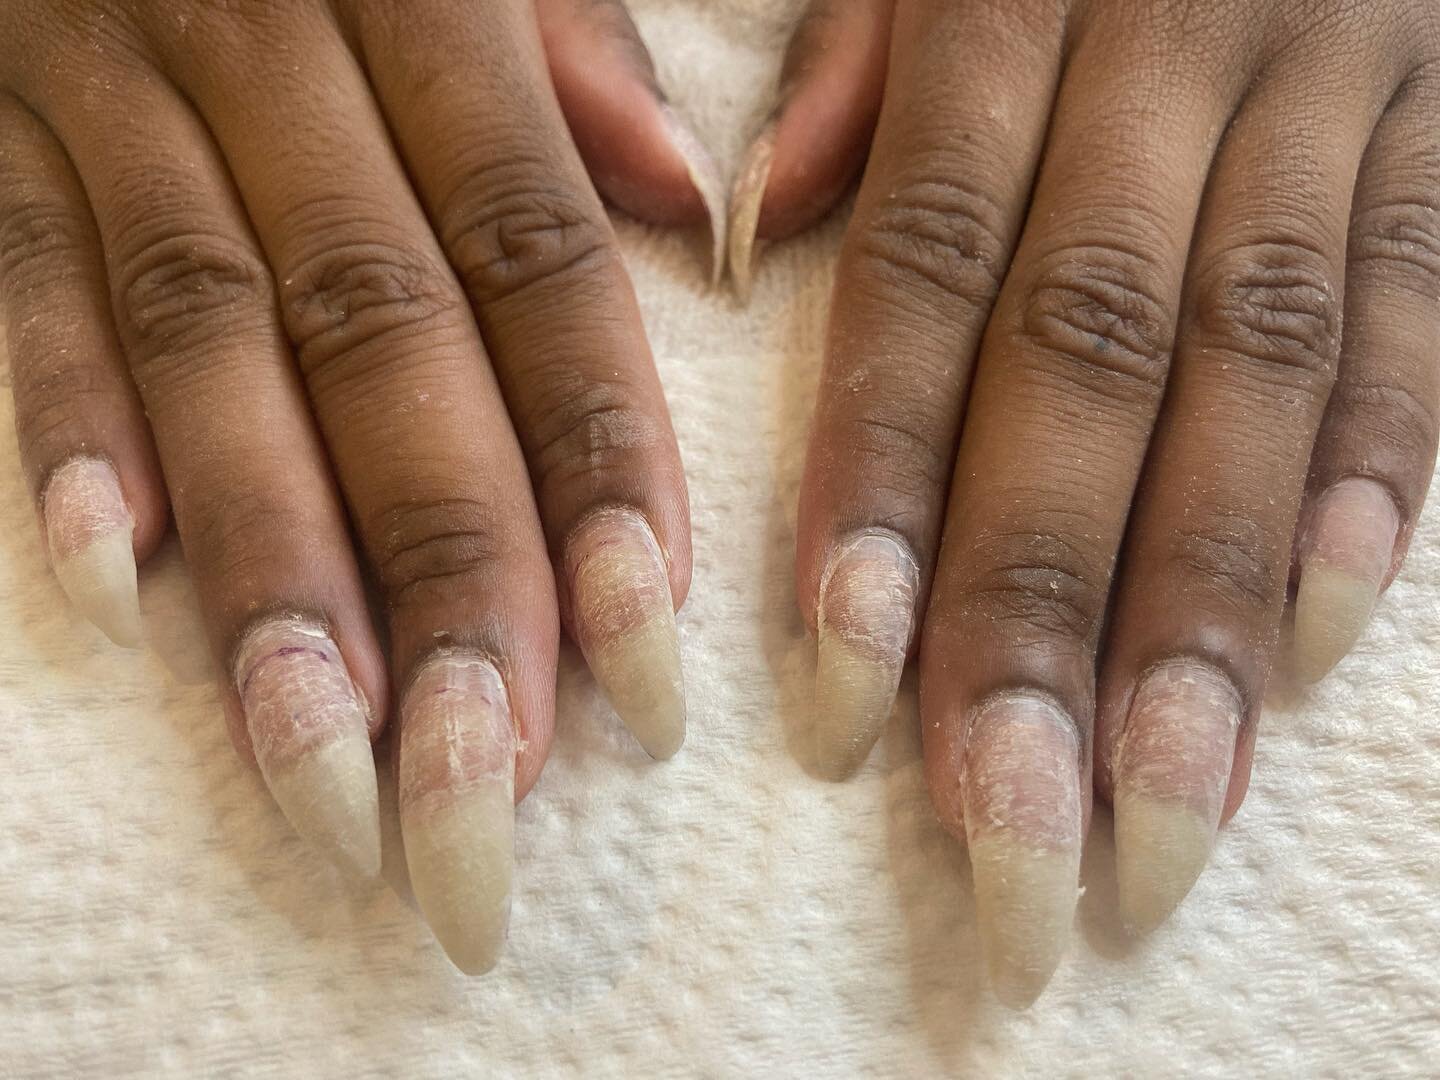 Polygel removal and new overlay application.

No matter the service maintaining the integrity of the natural nail is always my goal. 

This client started off with nails half the length of 1st photo. 
I recommend anywhere between 3-5 fills before sta